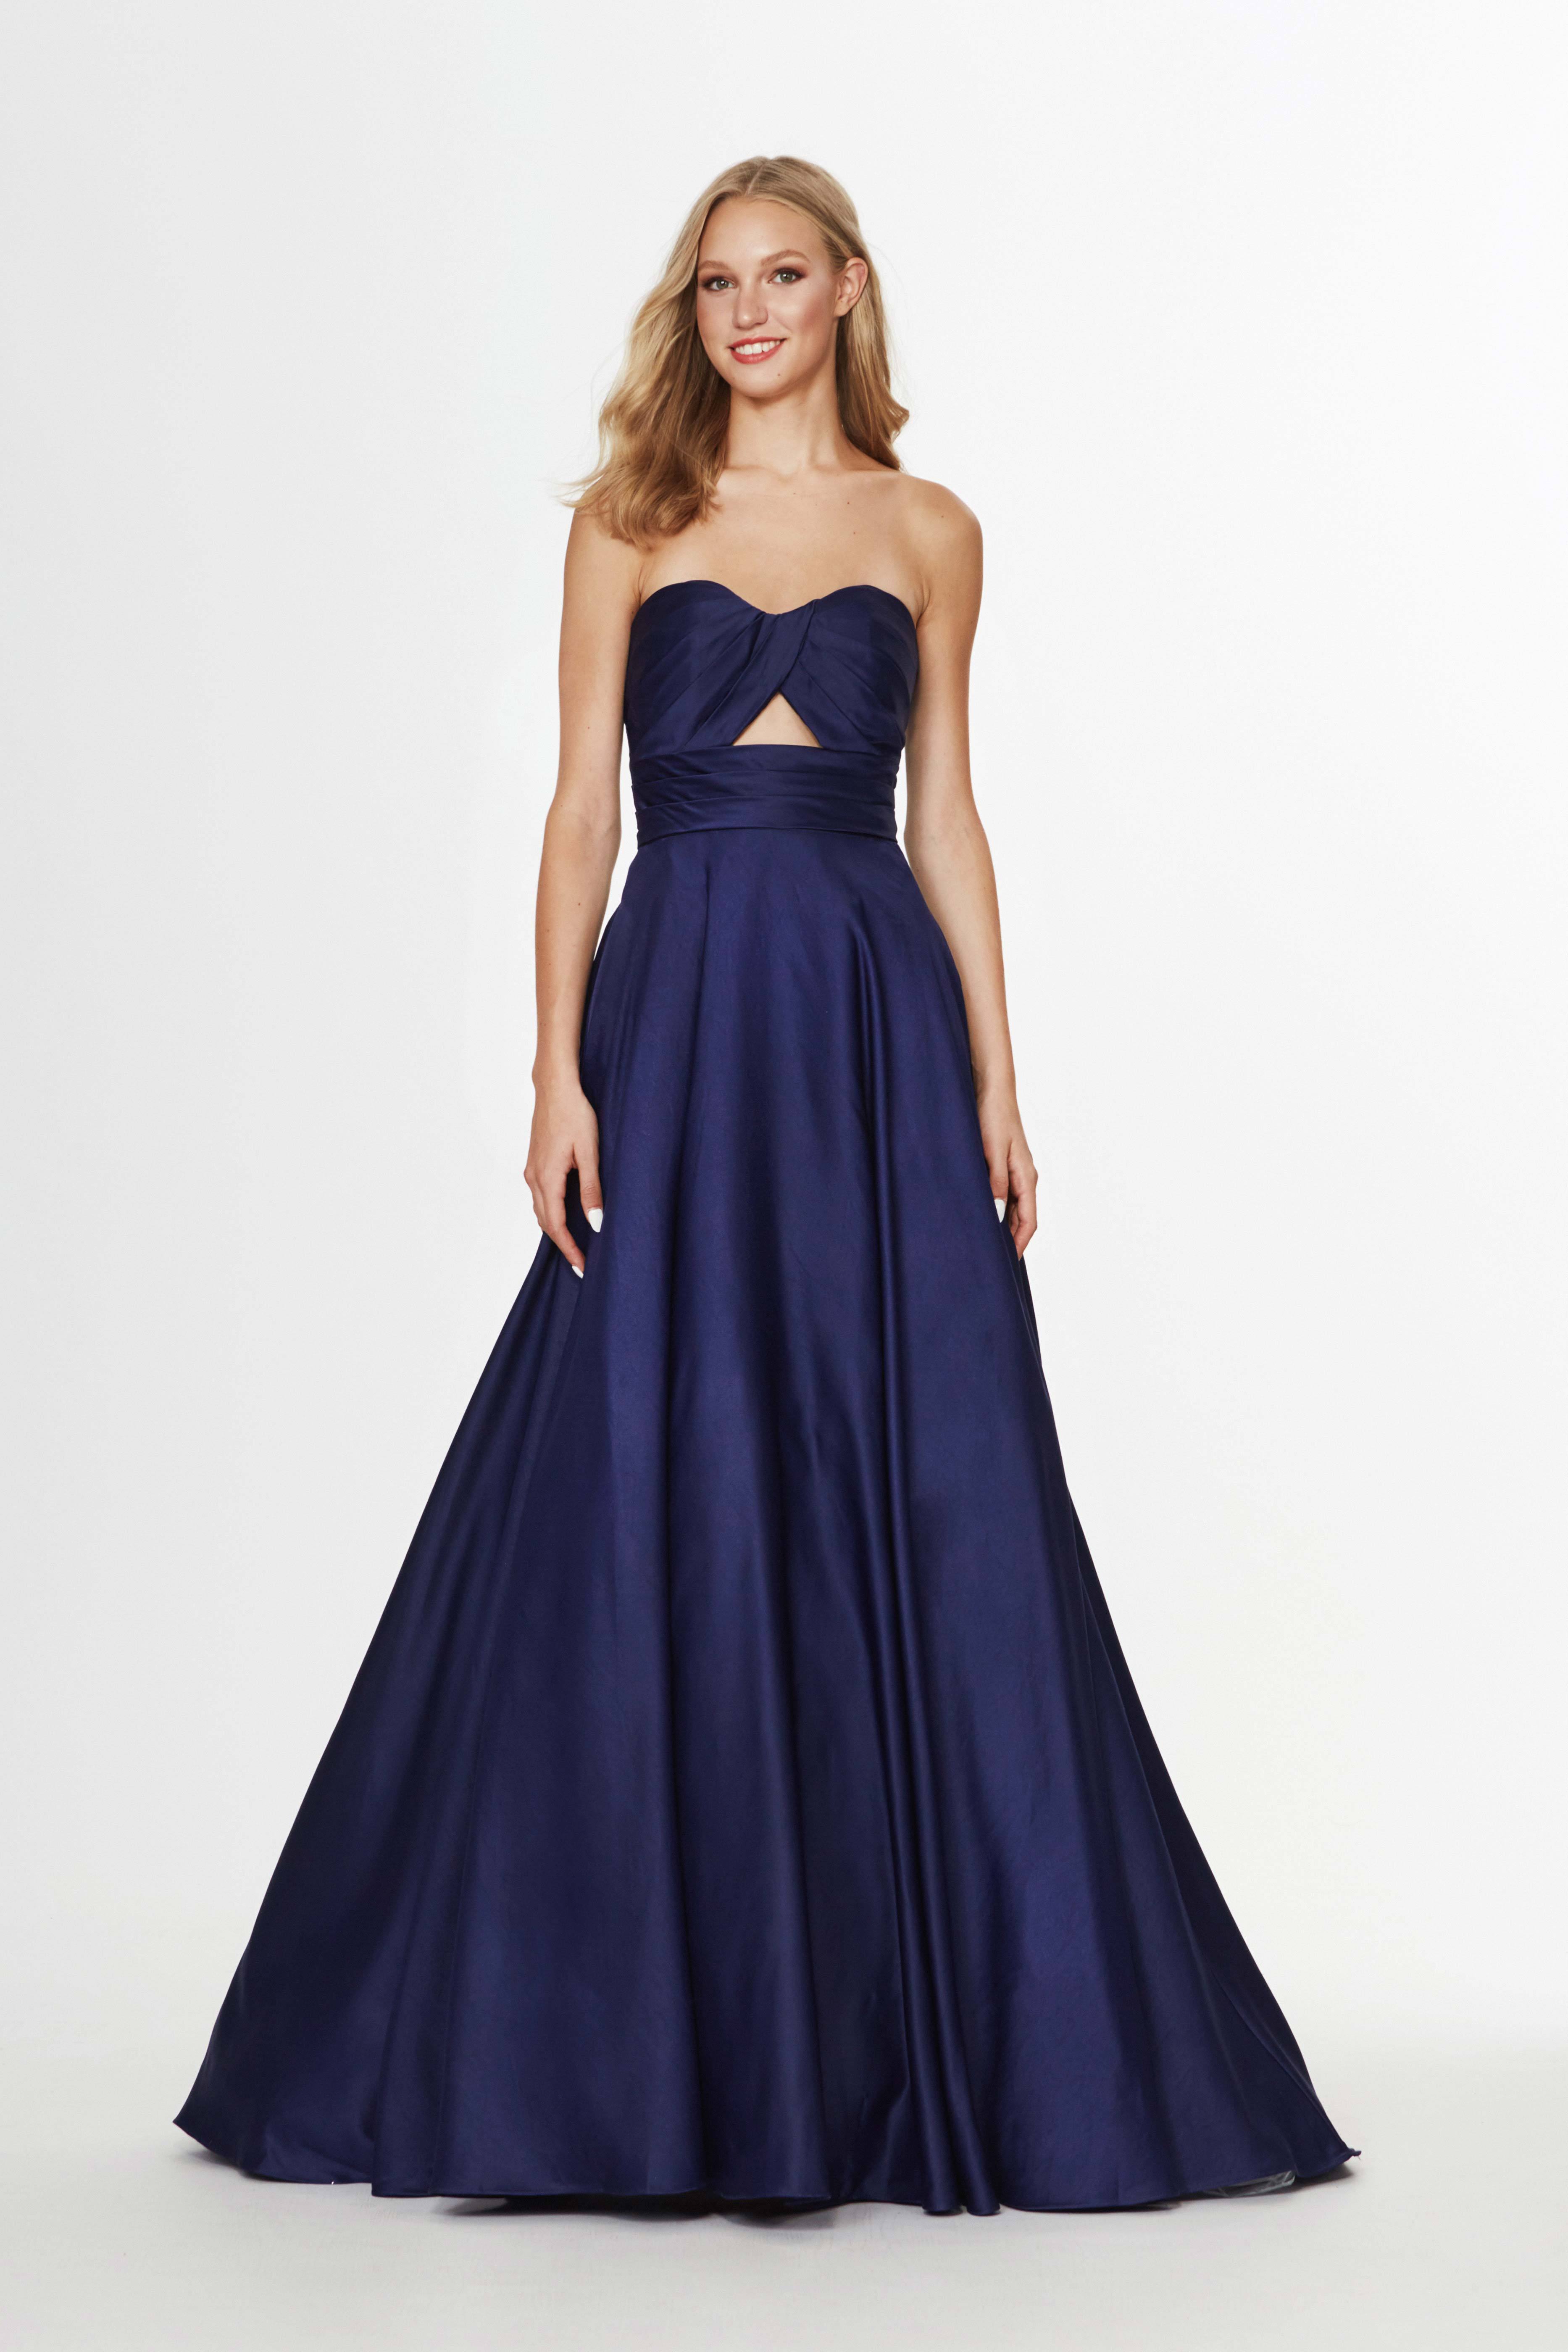 Angela & Alison - 91045 Strapless Sweetheart Keyhole Cutout Satin Gown
